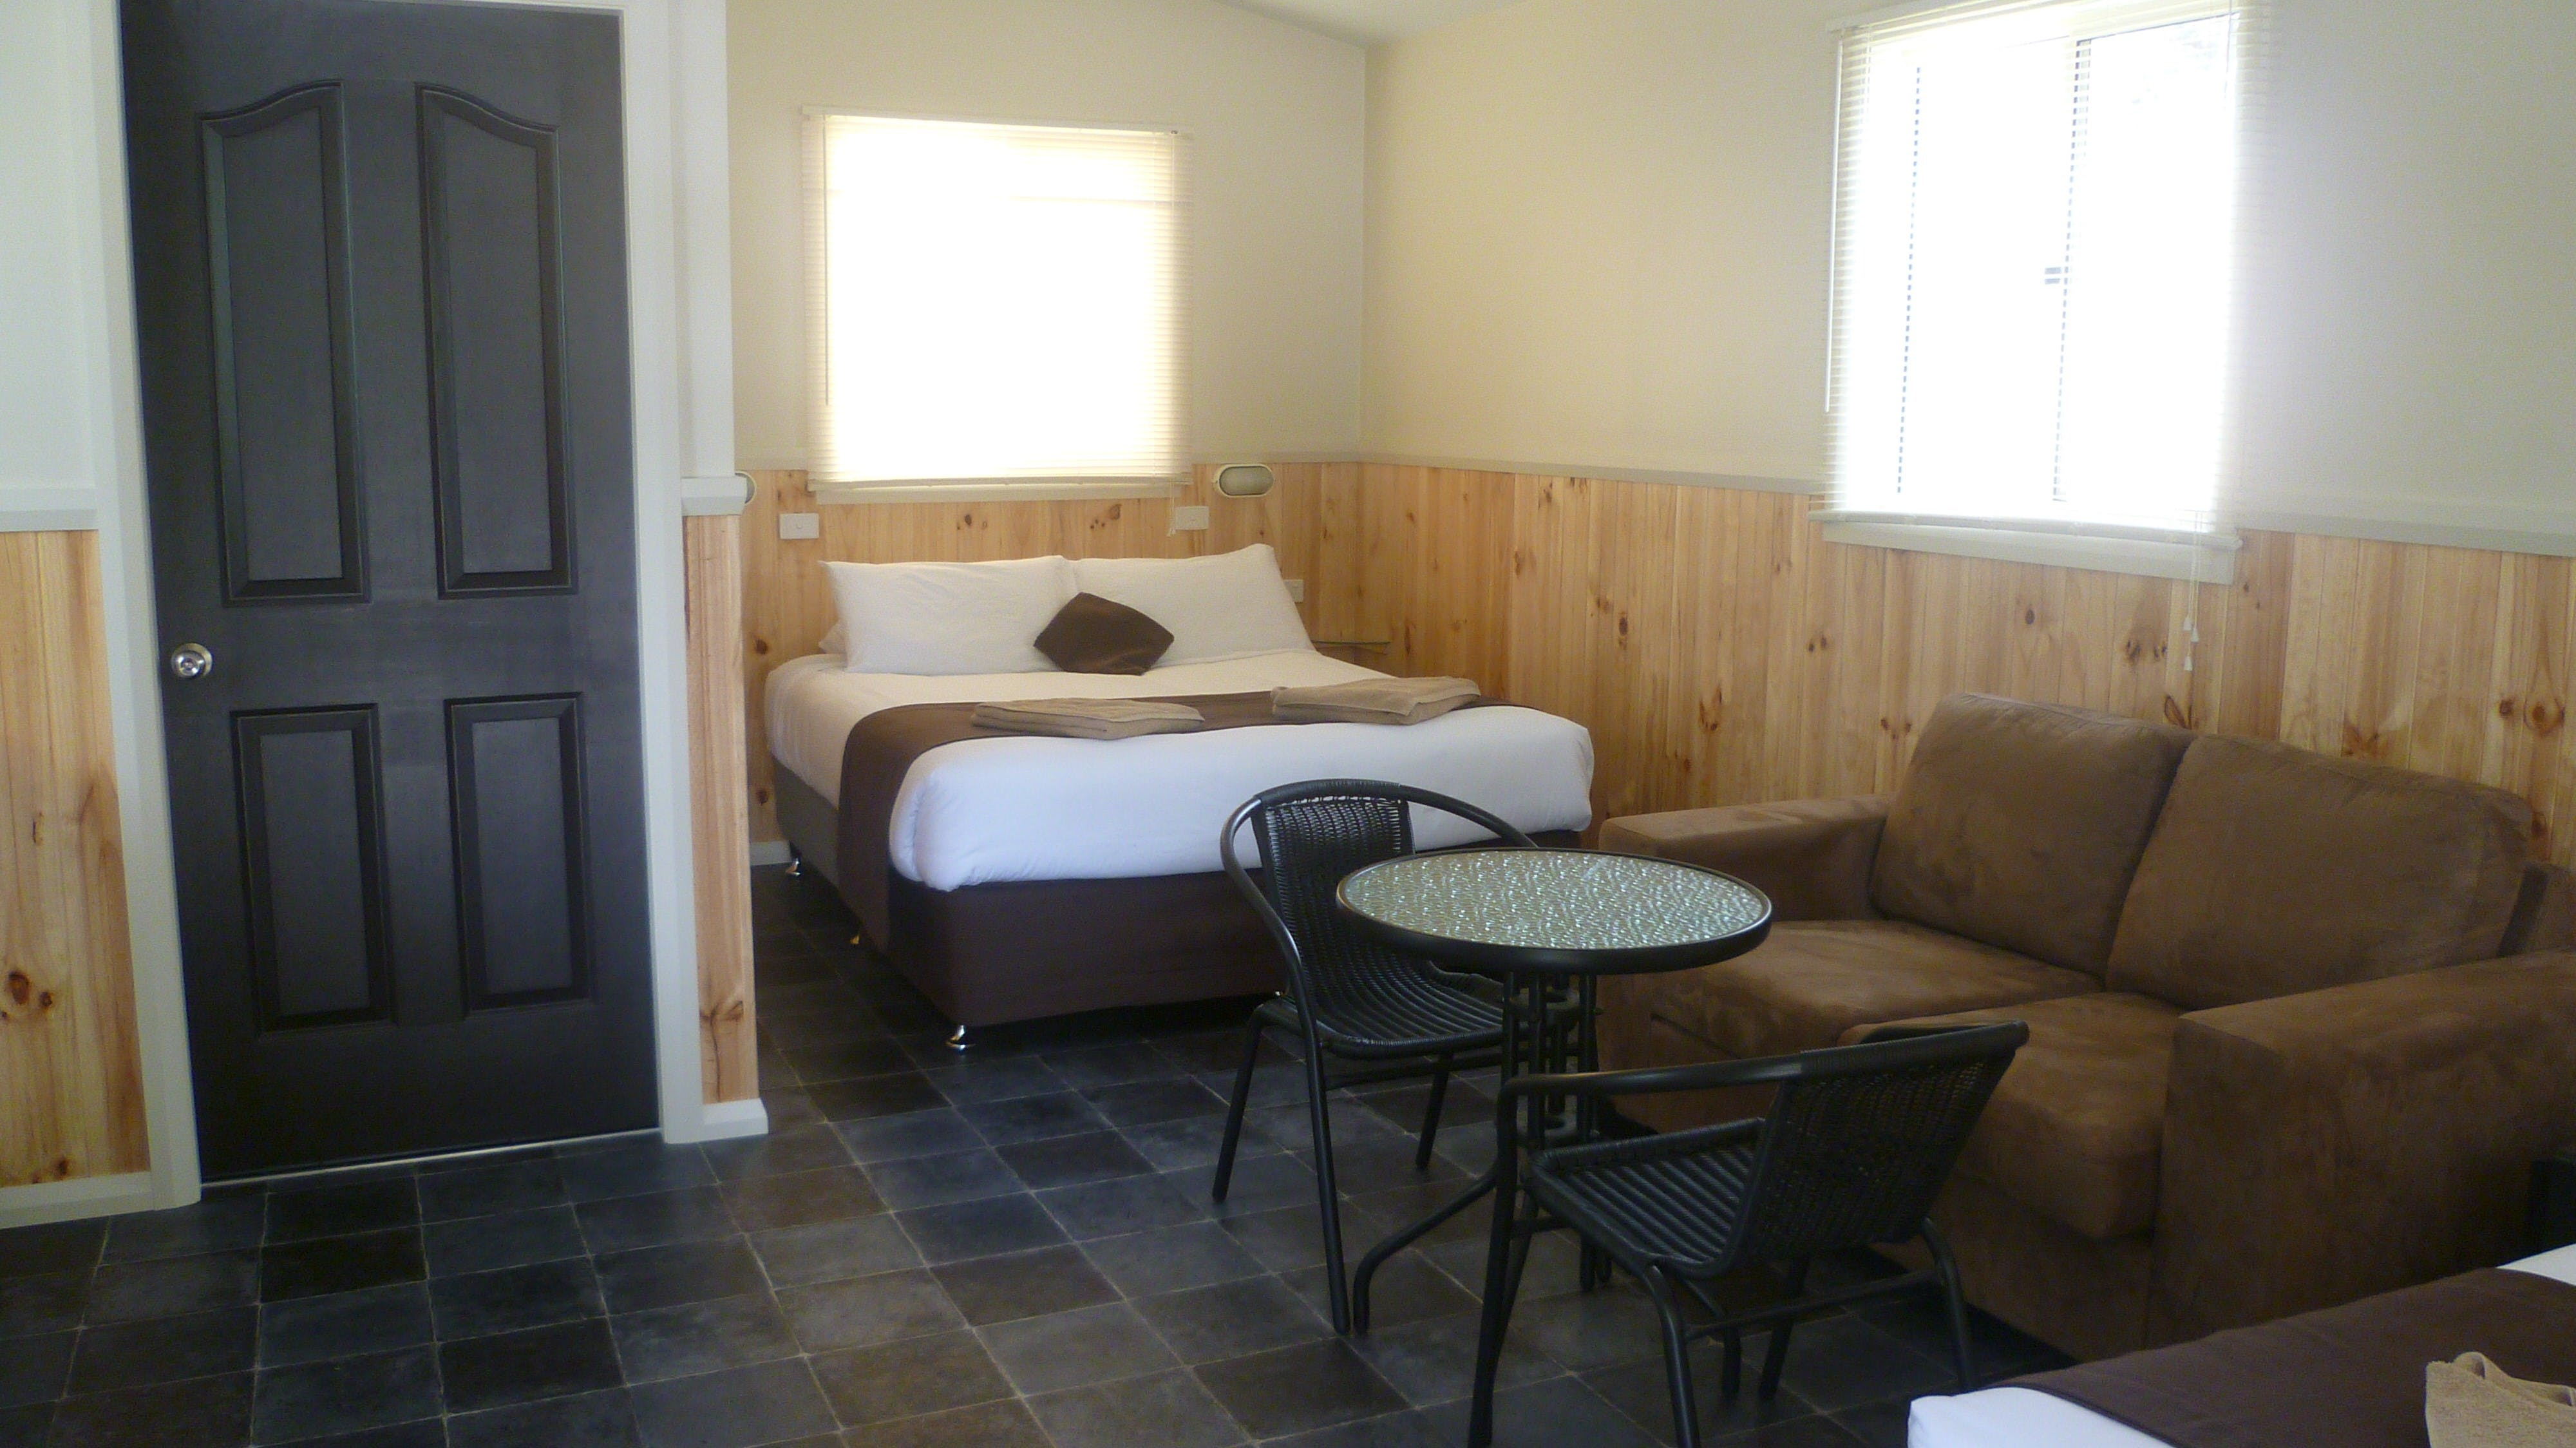 Lithgow Tourist and Van Park - Port Augusta Accommodation